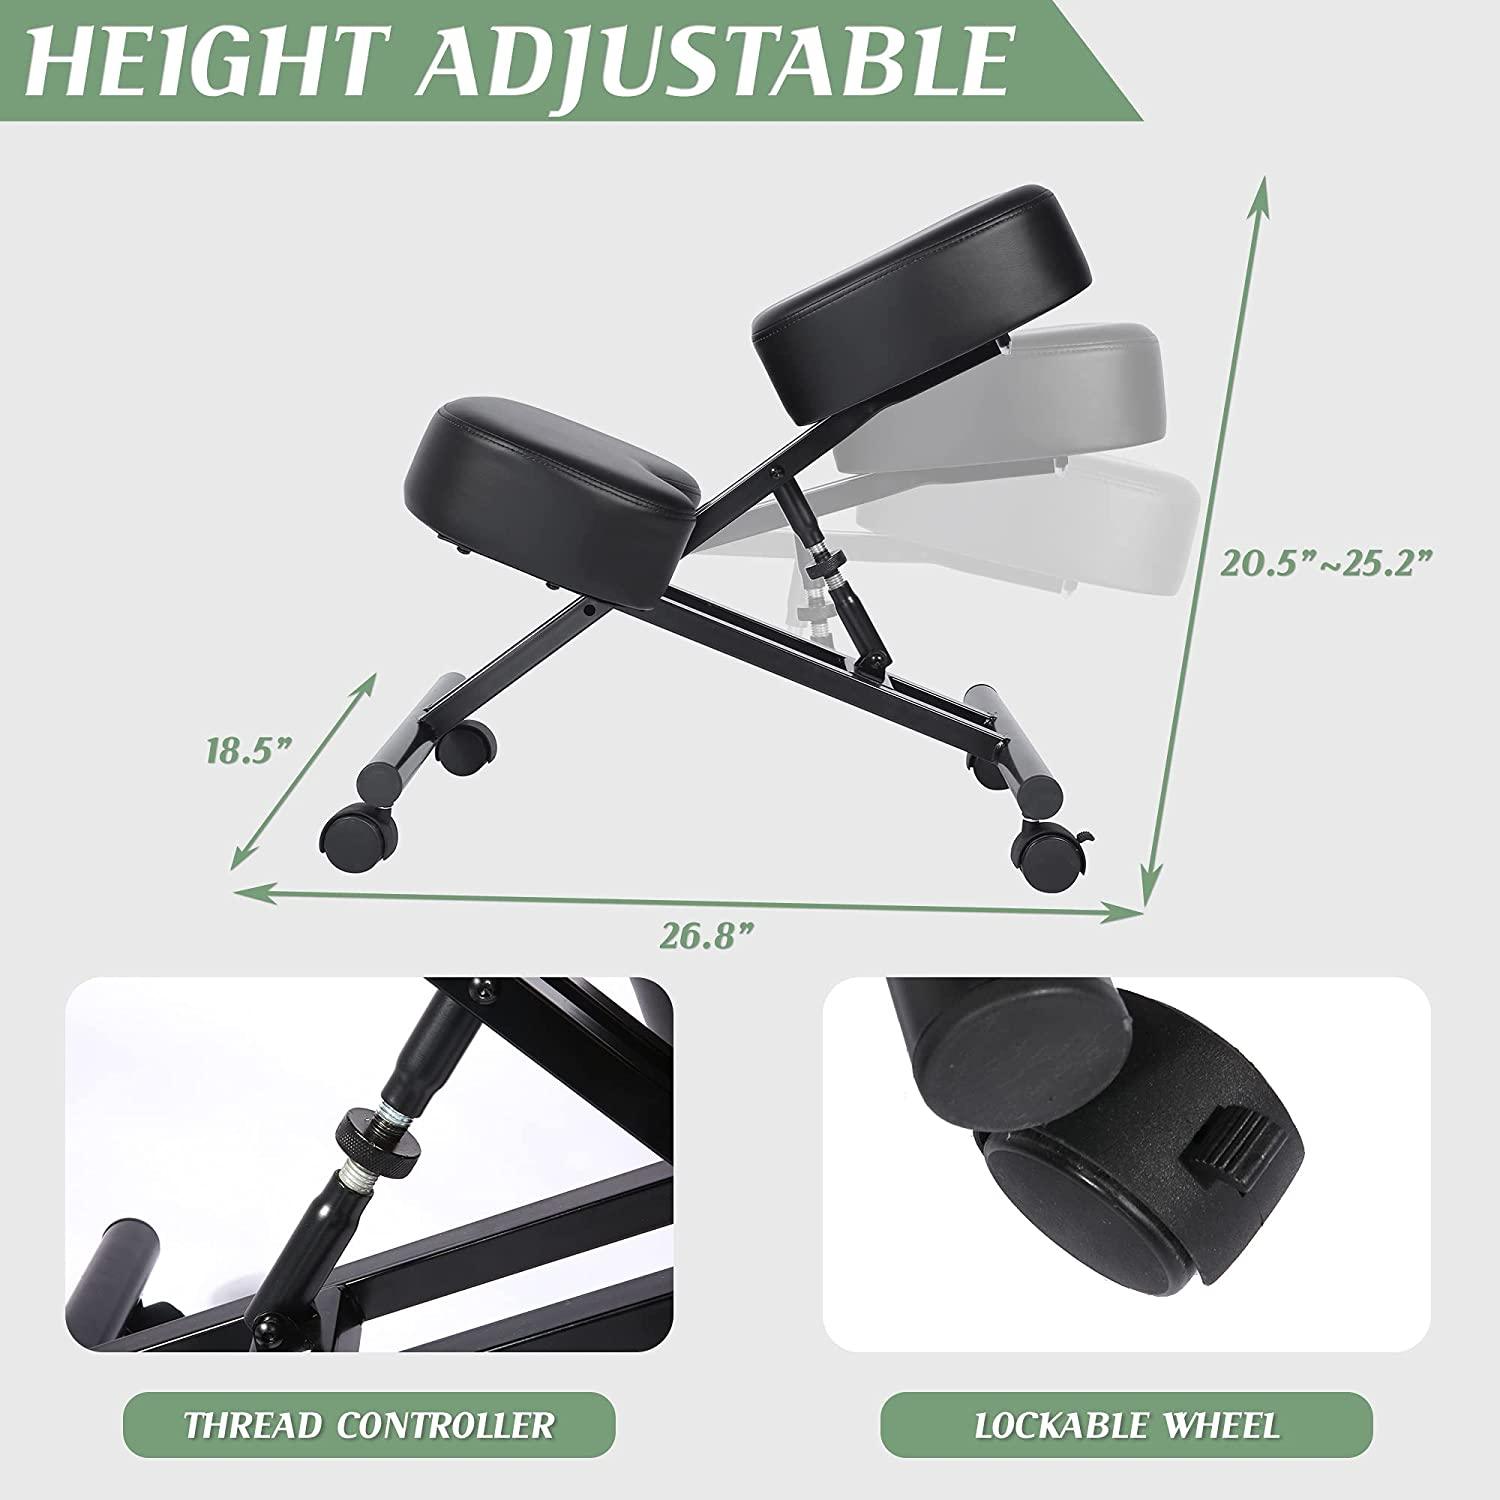 Adjustable Ergonomic Kneeling Chair Stool for Office and Home Angled seat with Lockable Wheel Support, 220LBS - Bosonshop